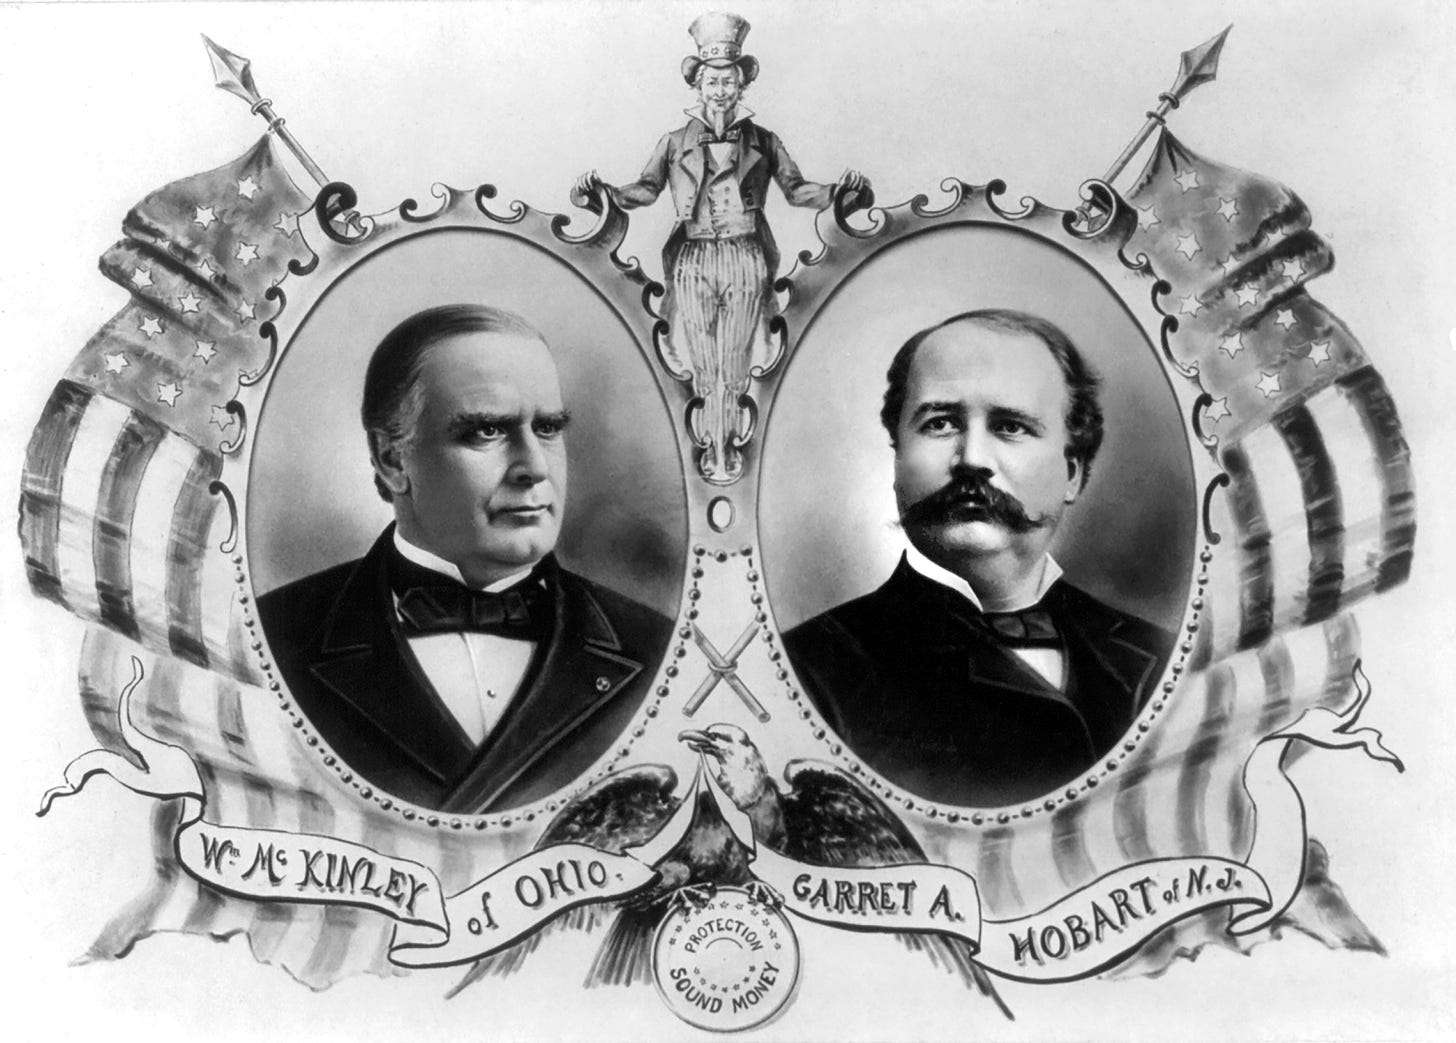 William McKinley and Garret A. Hobart, presidential election banner, 1896. (Photo by: Glasshouse Vintage/Universal History Archive/Universal Images Group via Getty Images)